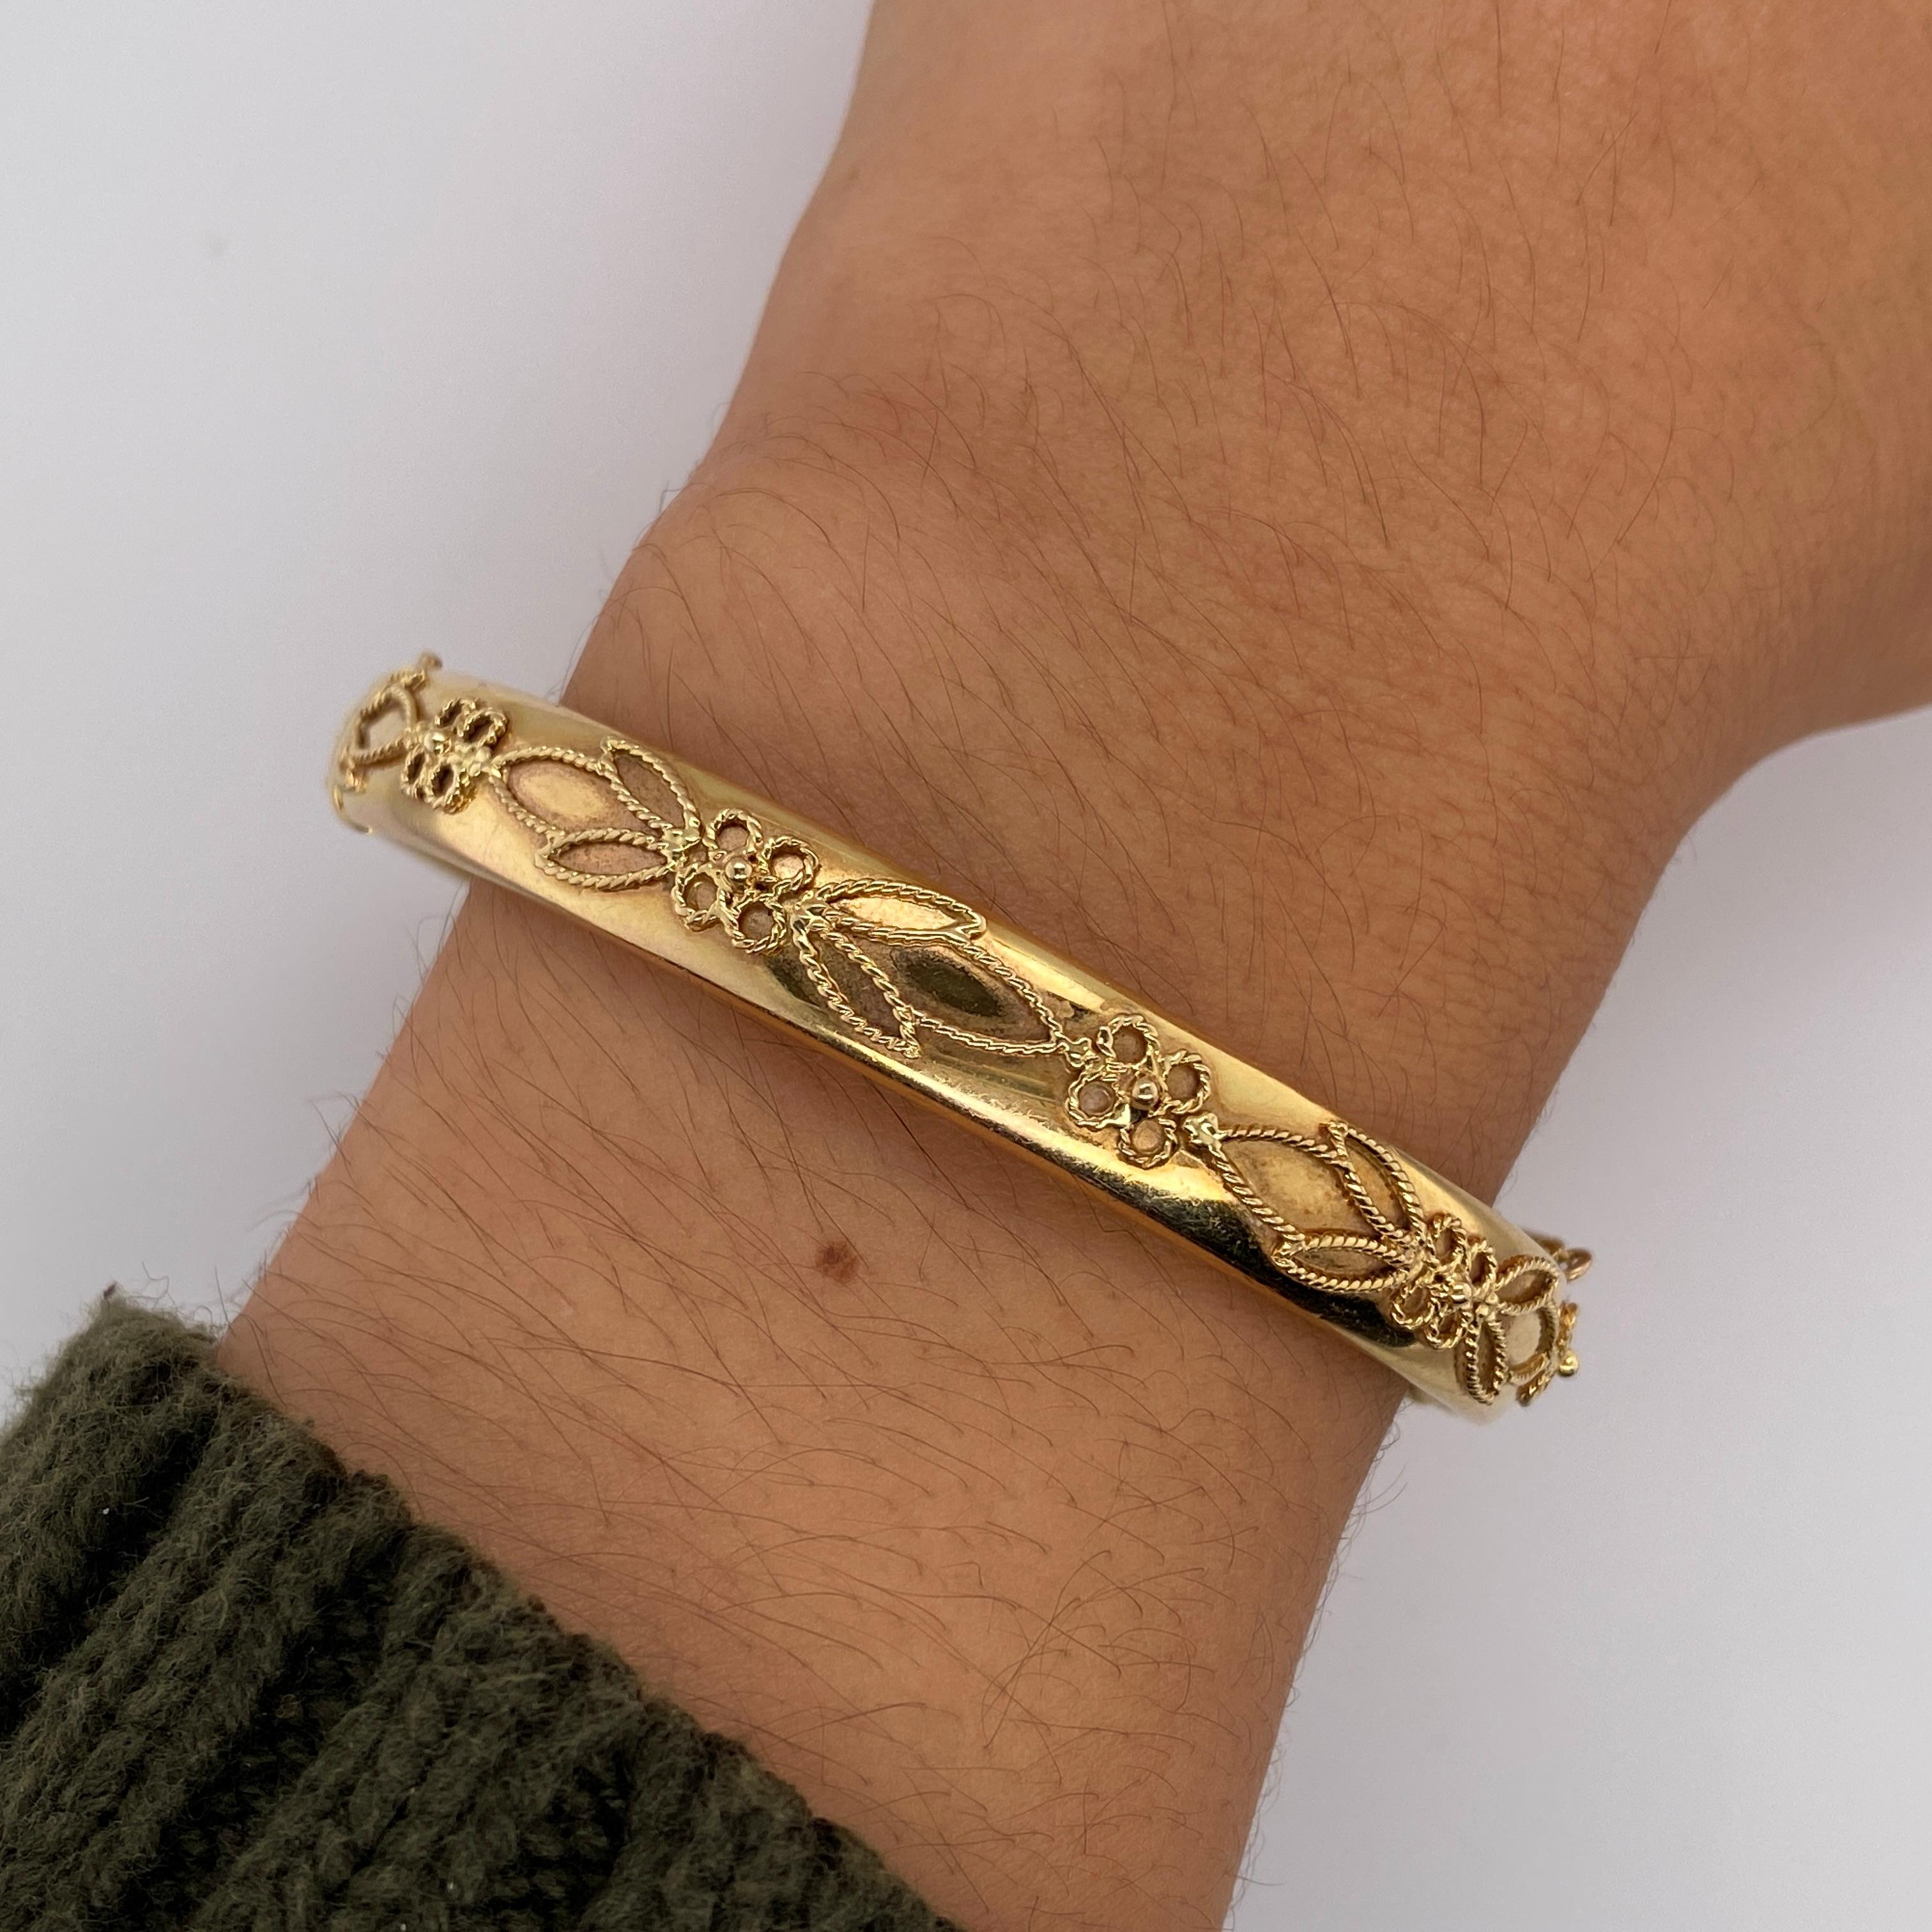 This beautifully preserved vintage Italian bracelet is made in 14 karat yellow gold. The softly reflective surface of the bracelet is decorated in a leaf and flower or clover design made out of twisted wire. The hinged bangle bracelet measures 8